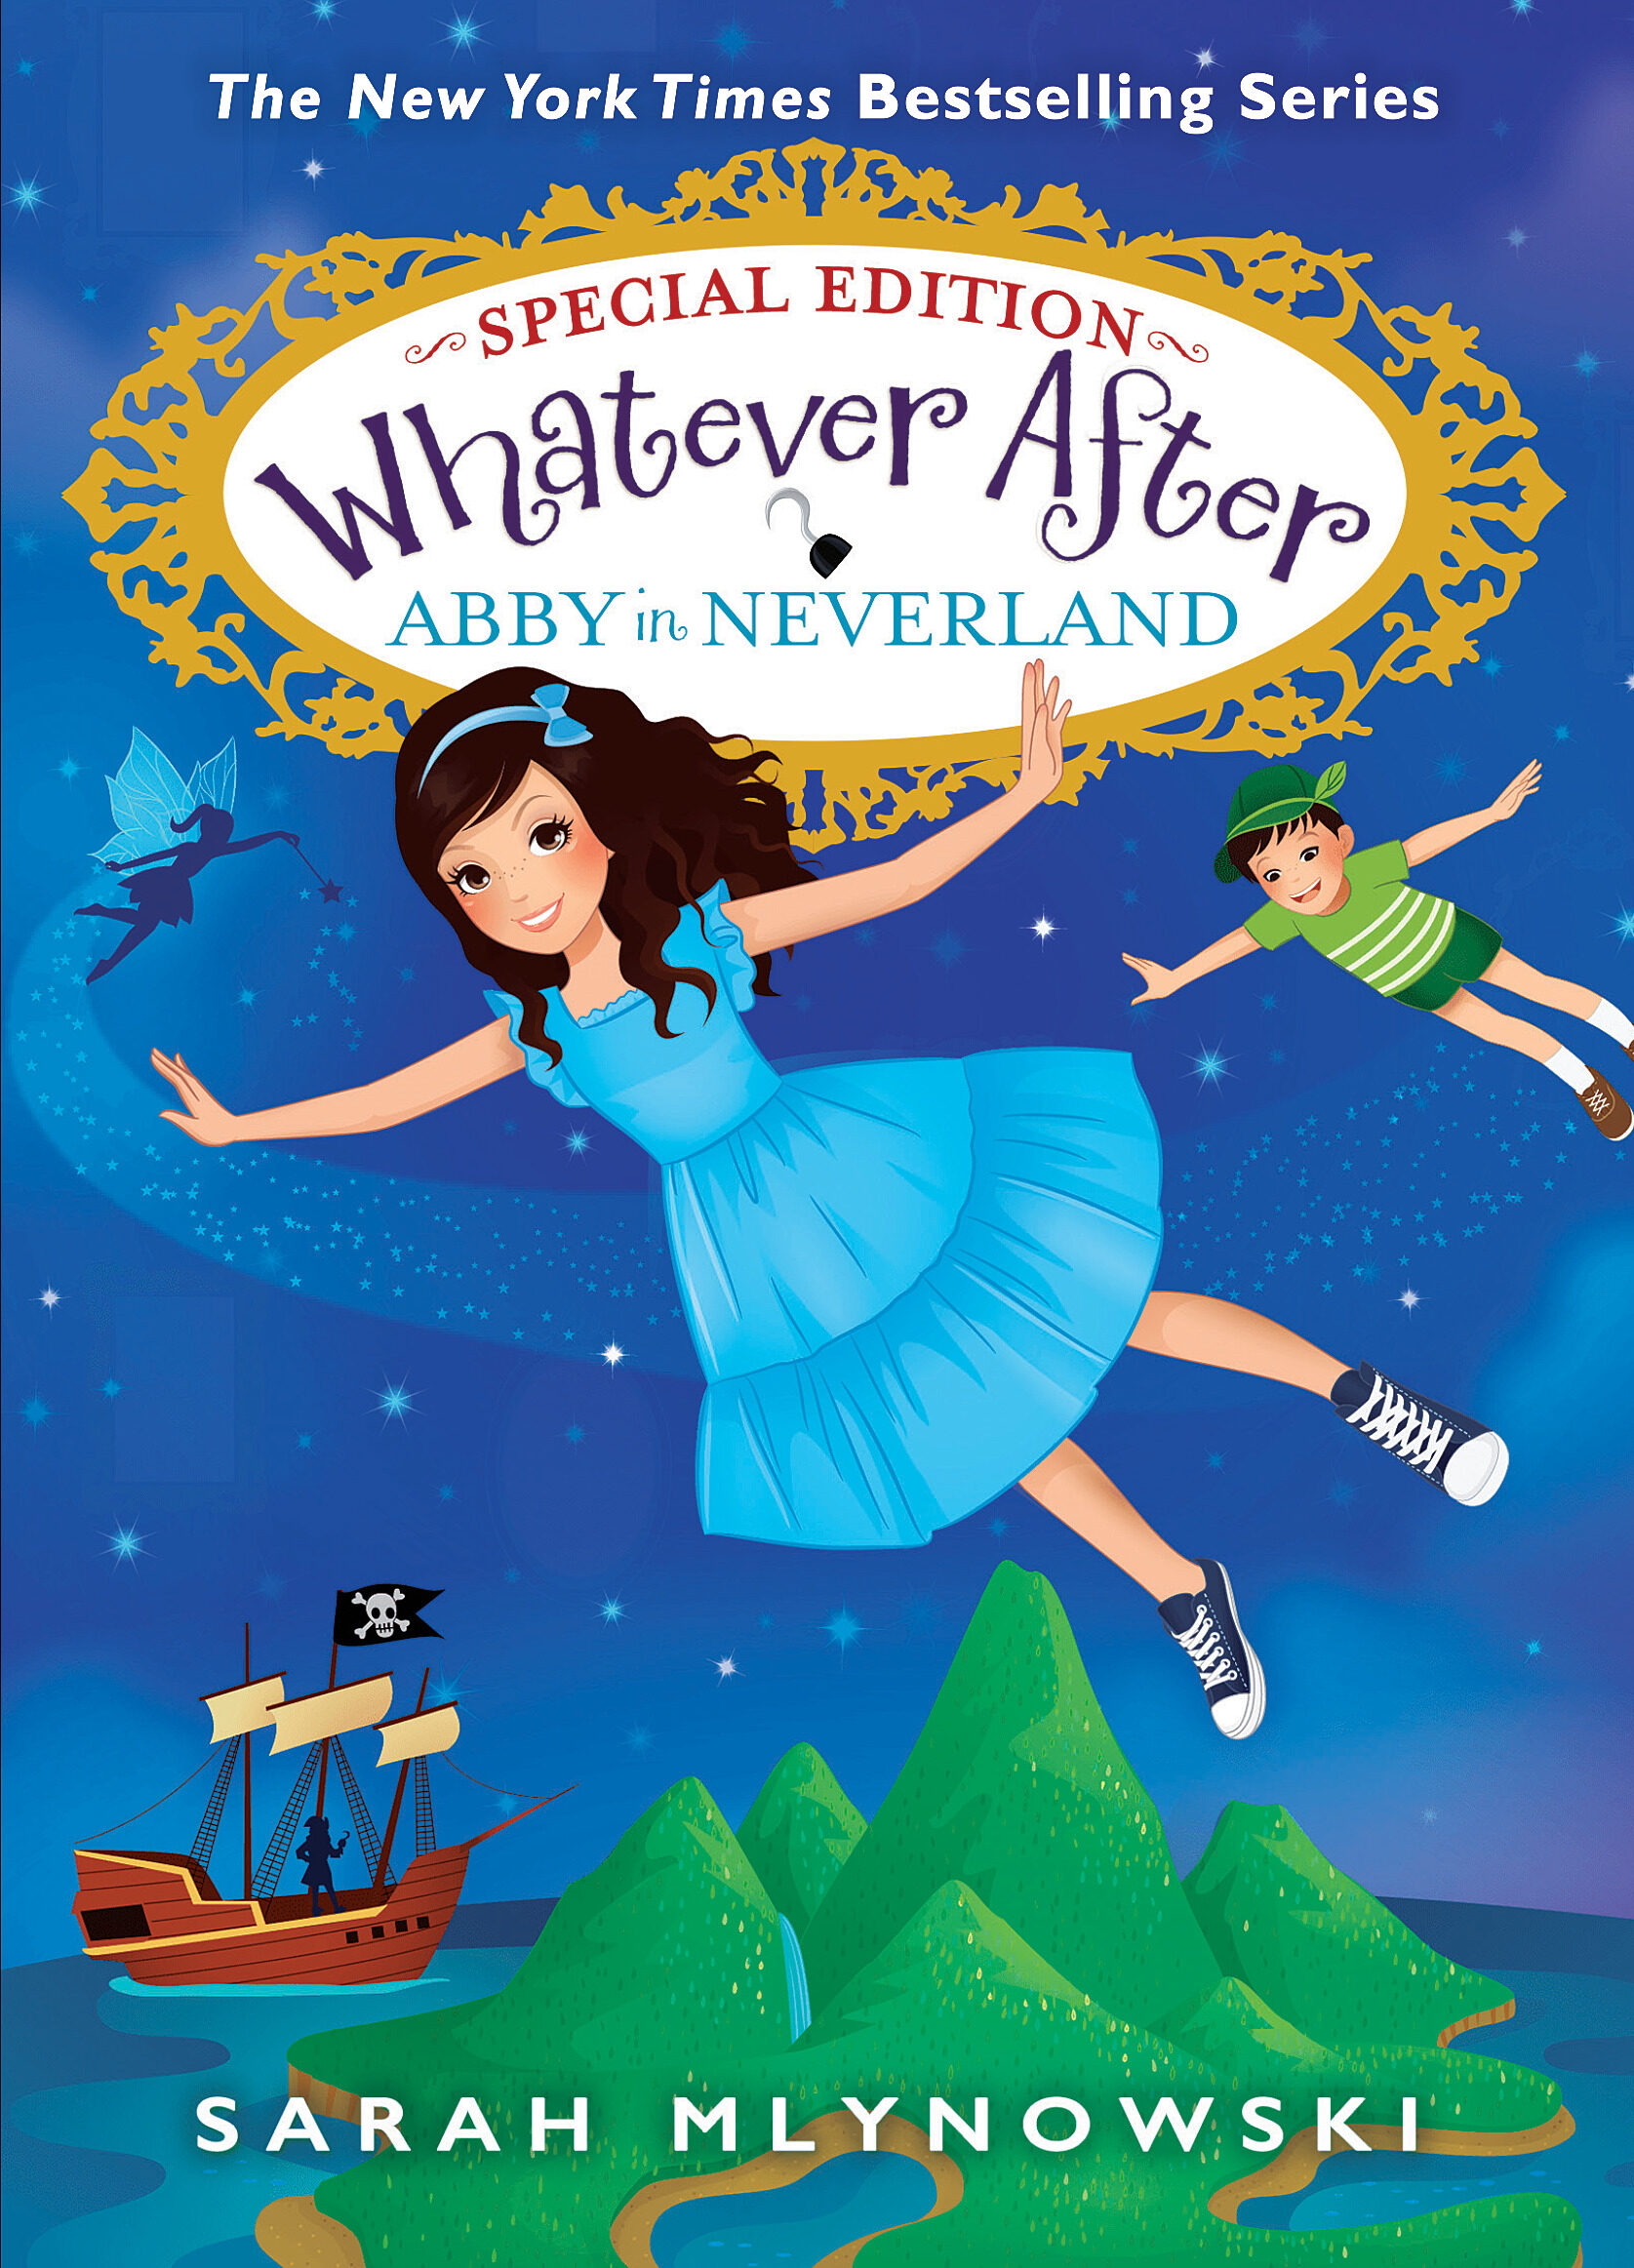 Abby in Neverland